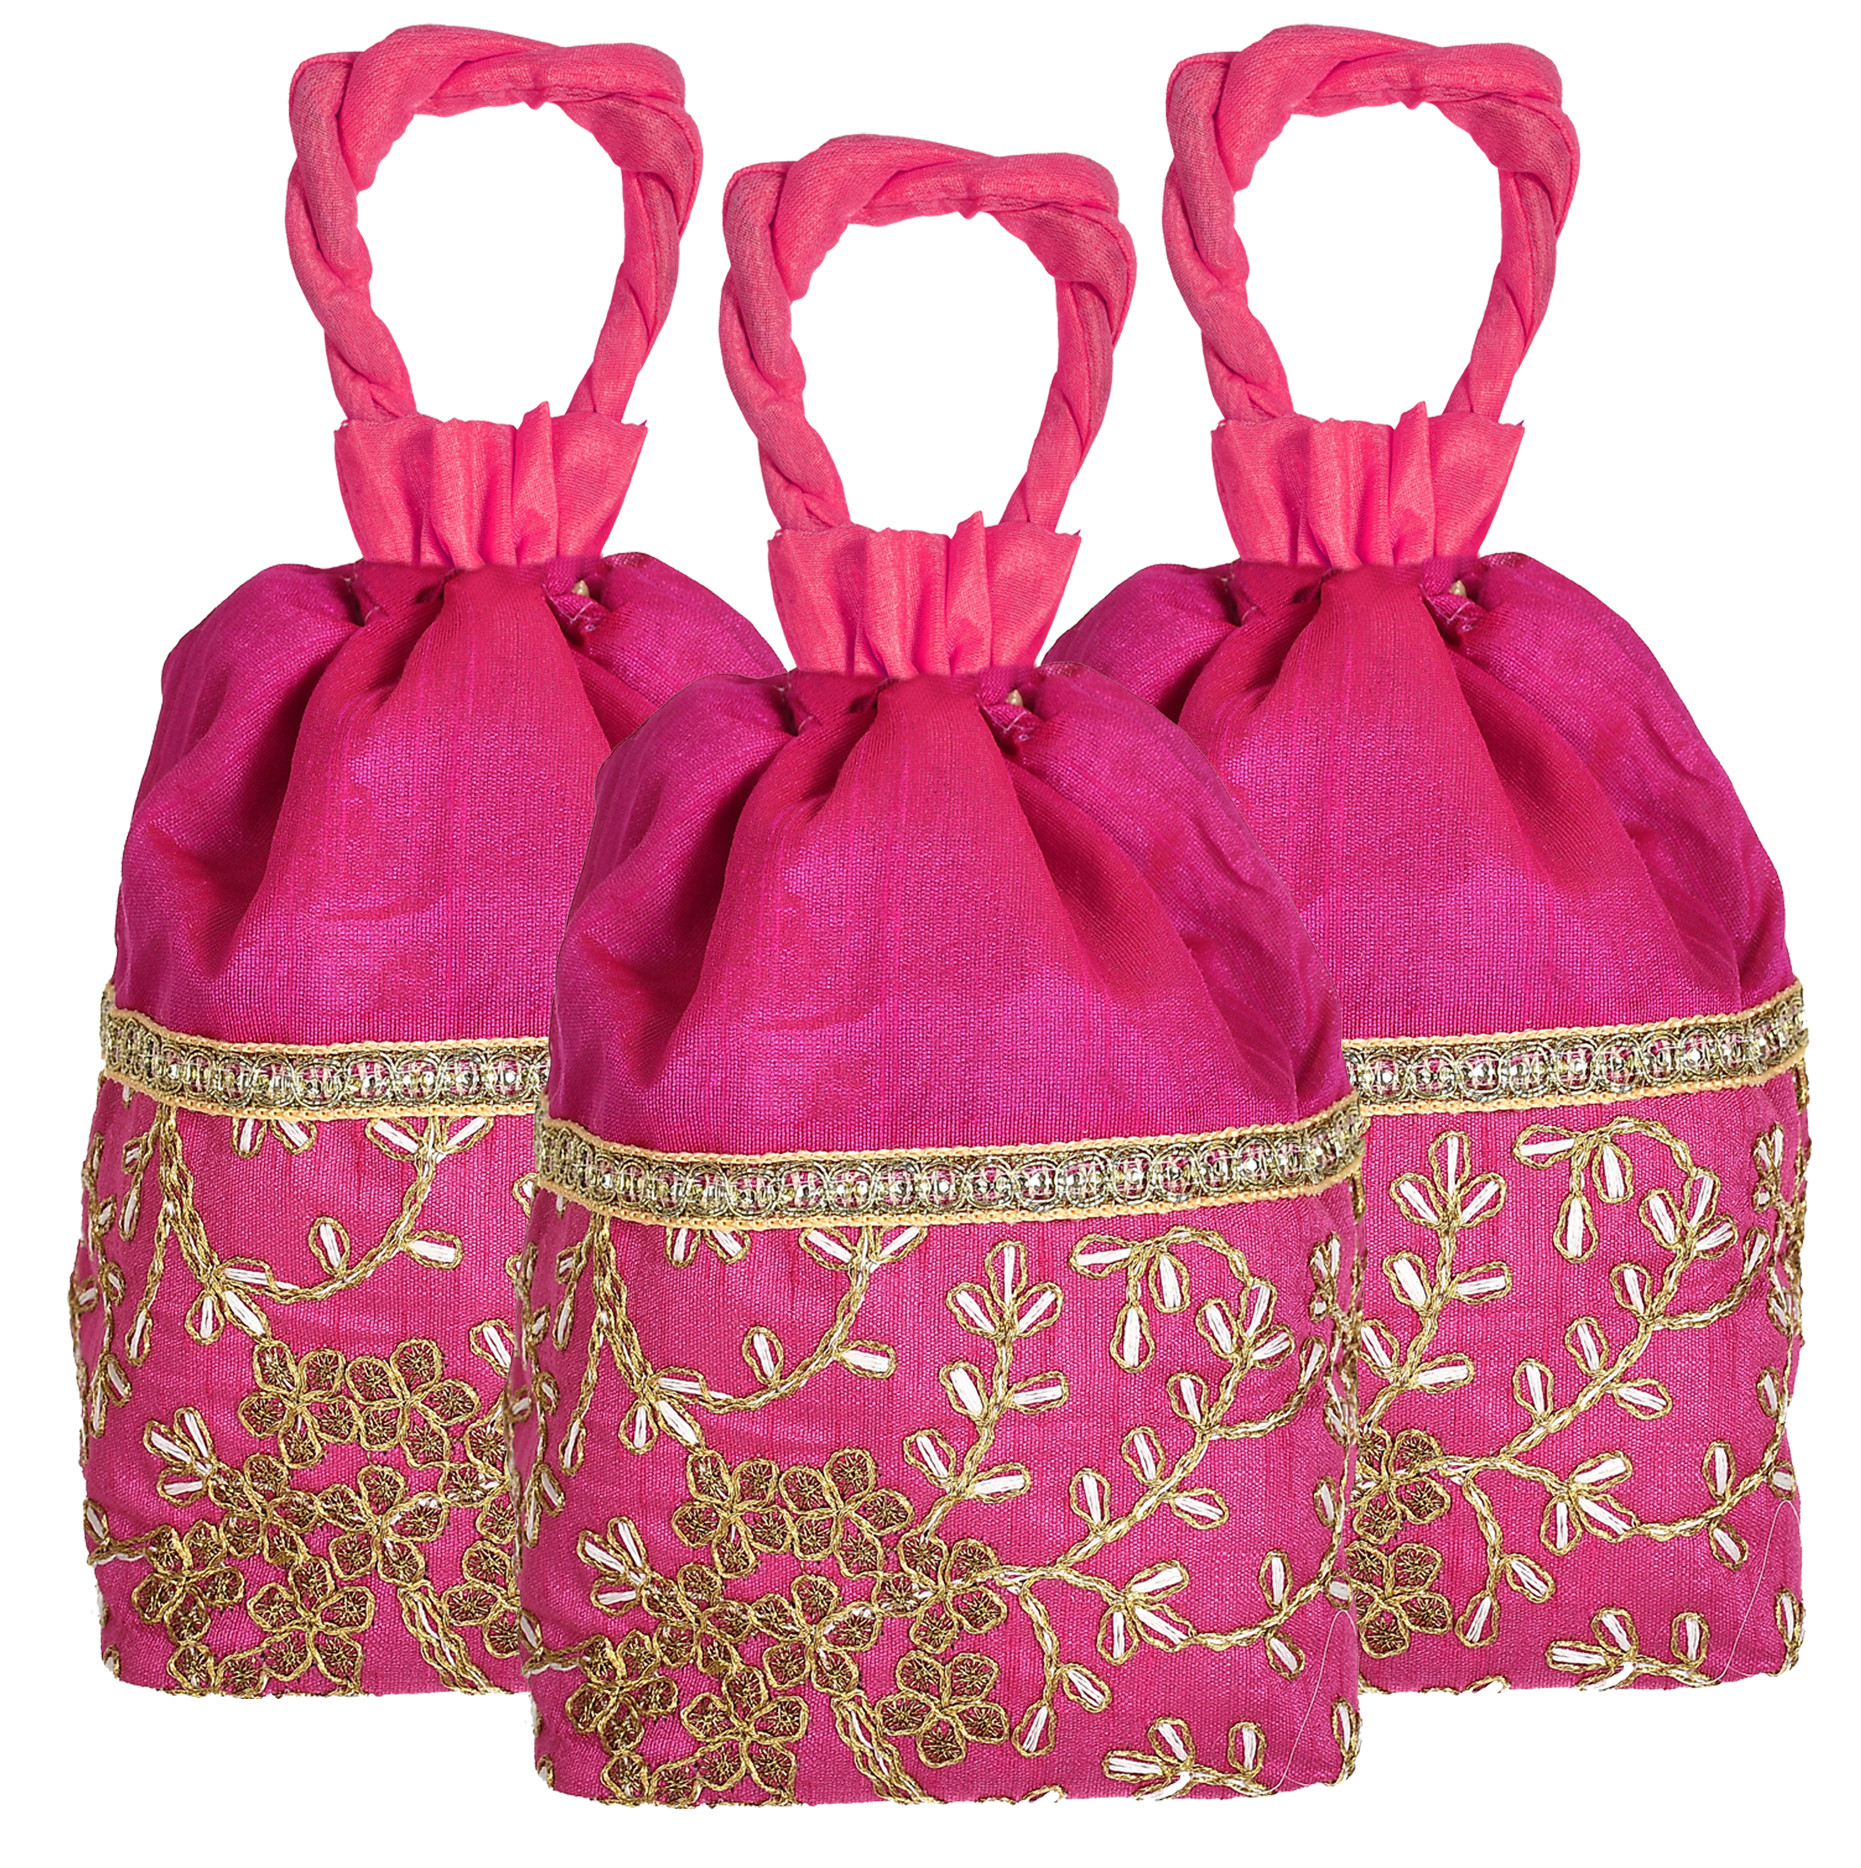 Kuber Industries Embroidered Design Drawstring Potli Bag Party Wedding Favor Gift Jewelry Bags-(Pink)